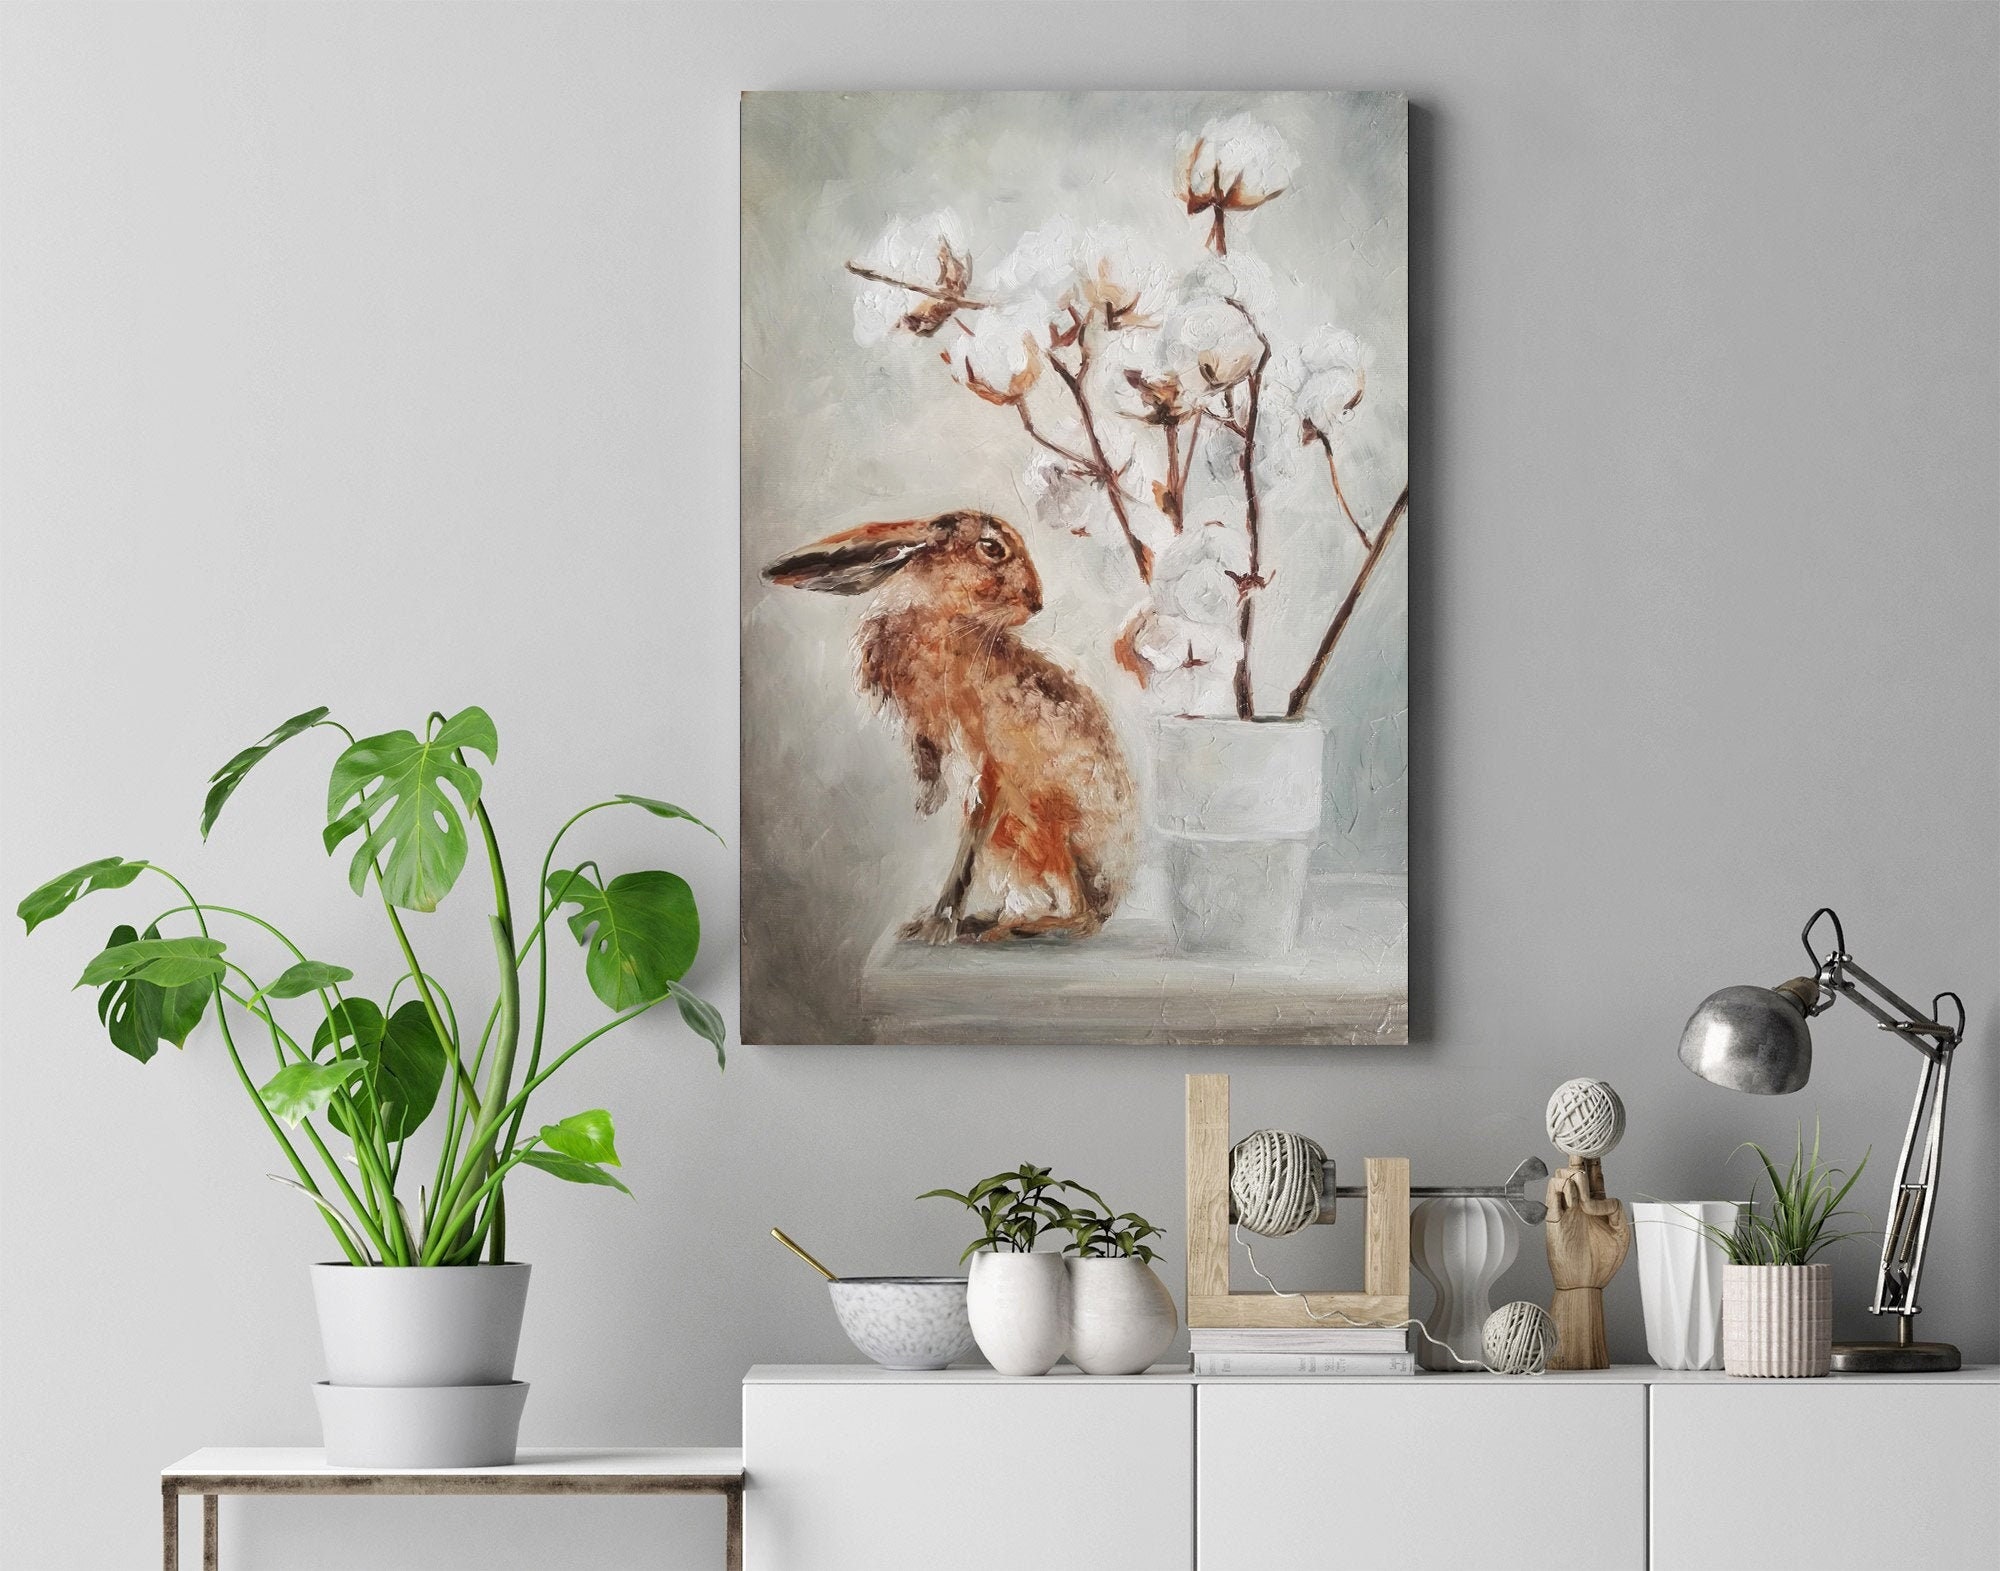 Hare and cotton bolls in the vase original oil painting | Etsy